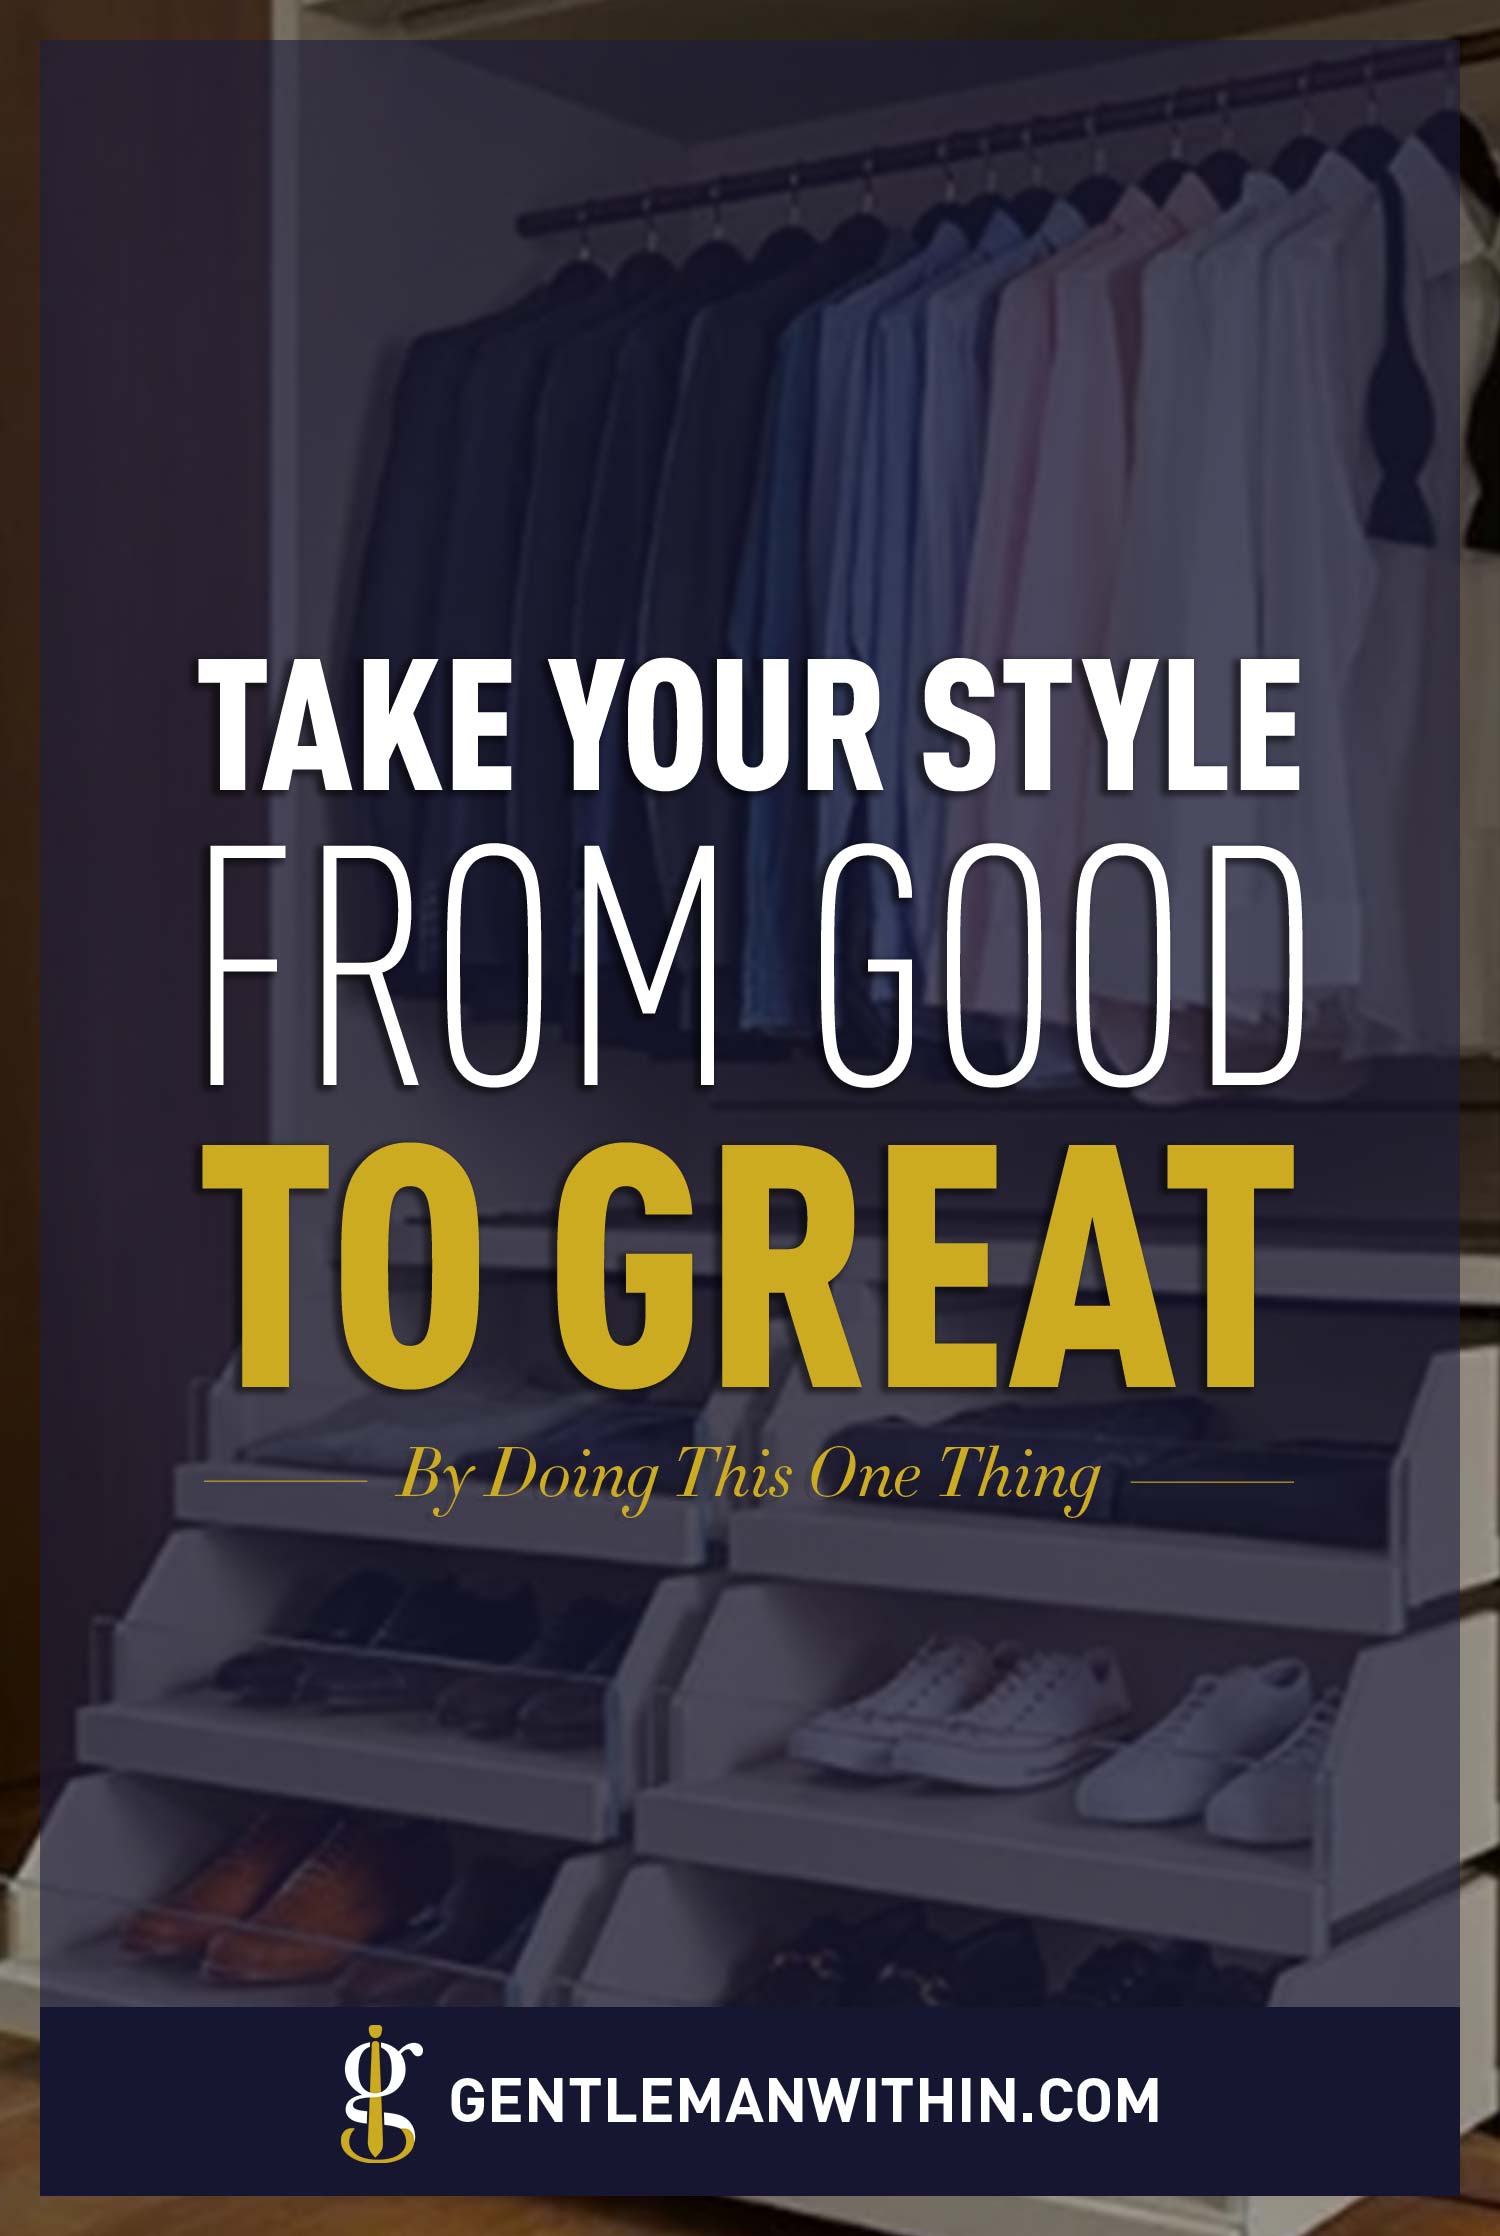 Take Your Style From Good To Great | GENTLEMAN WITHIN